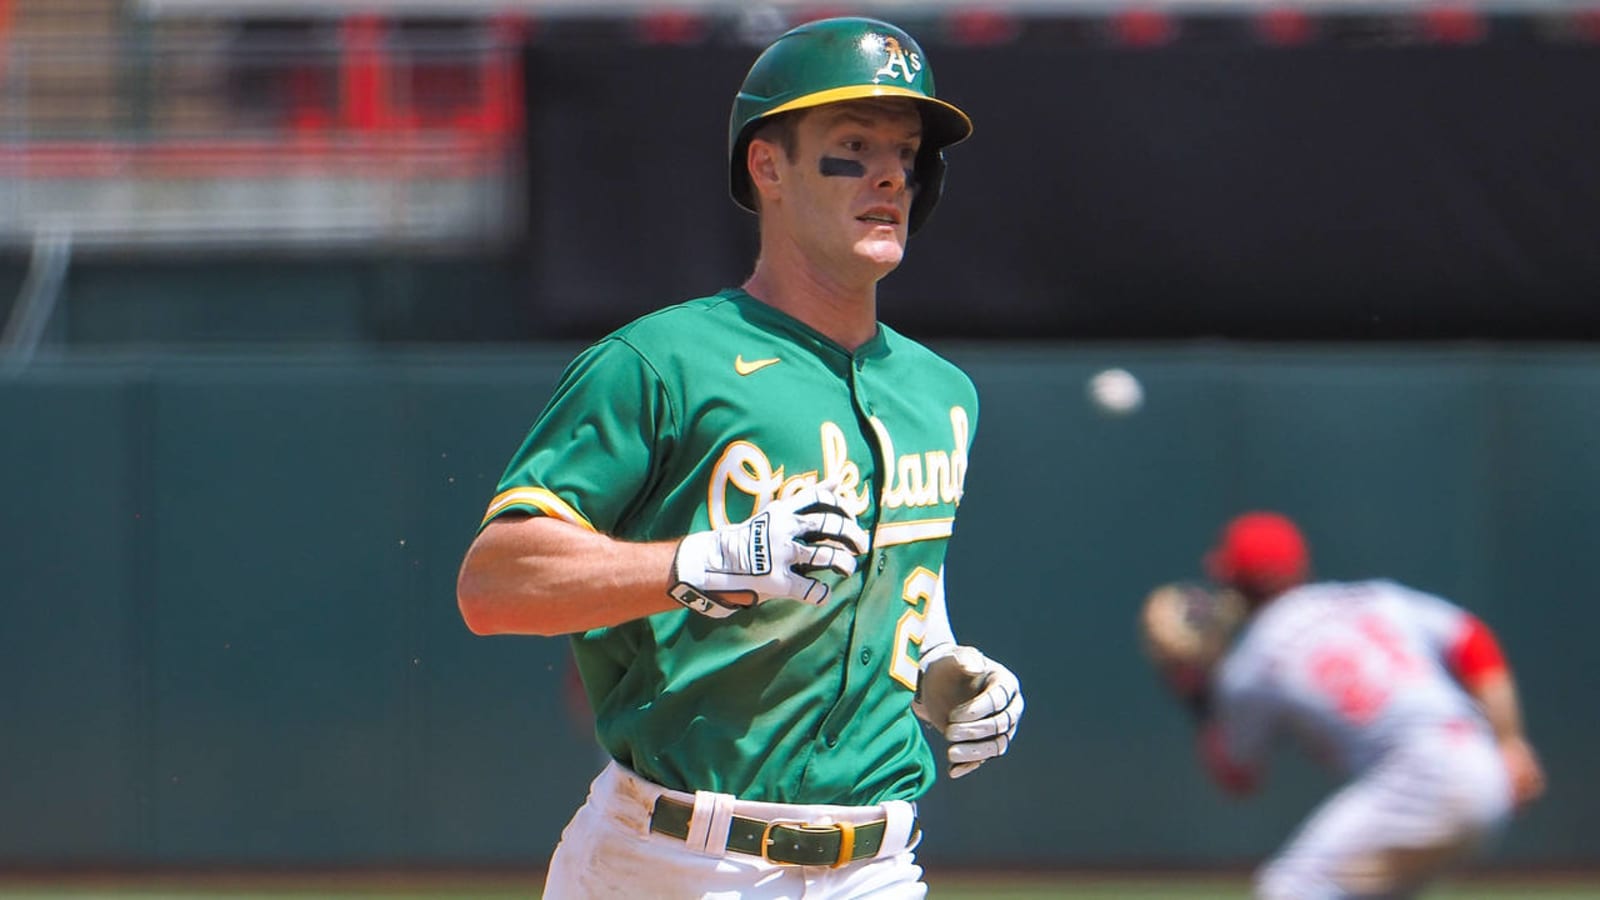 A's Canha likely out through All-Star Game with hip strain